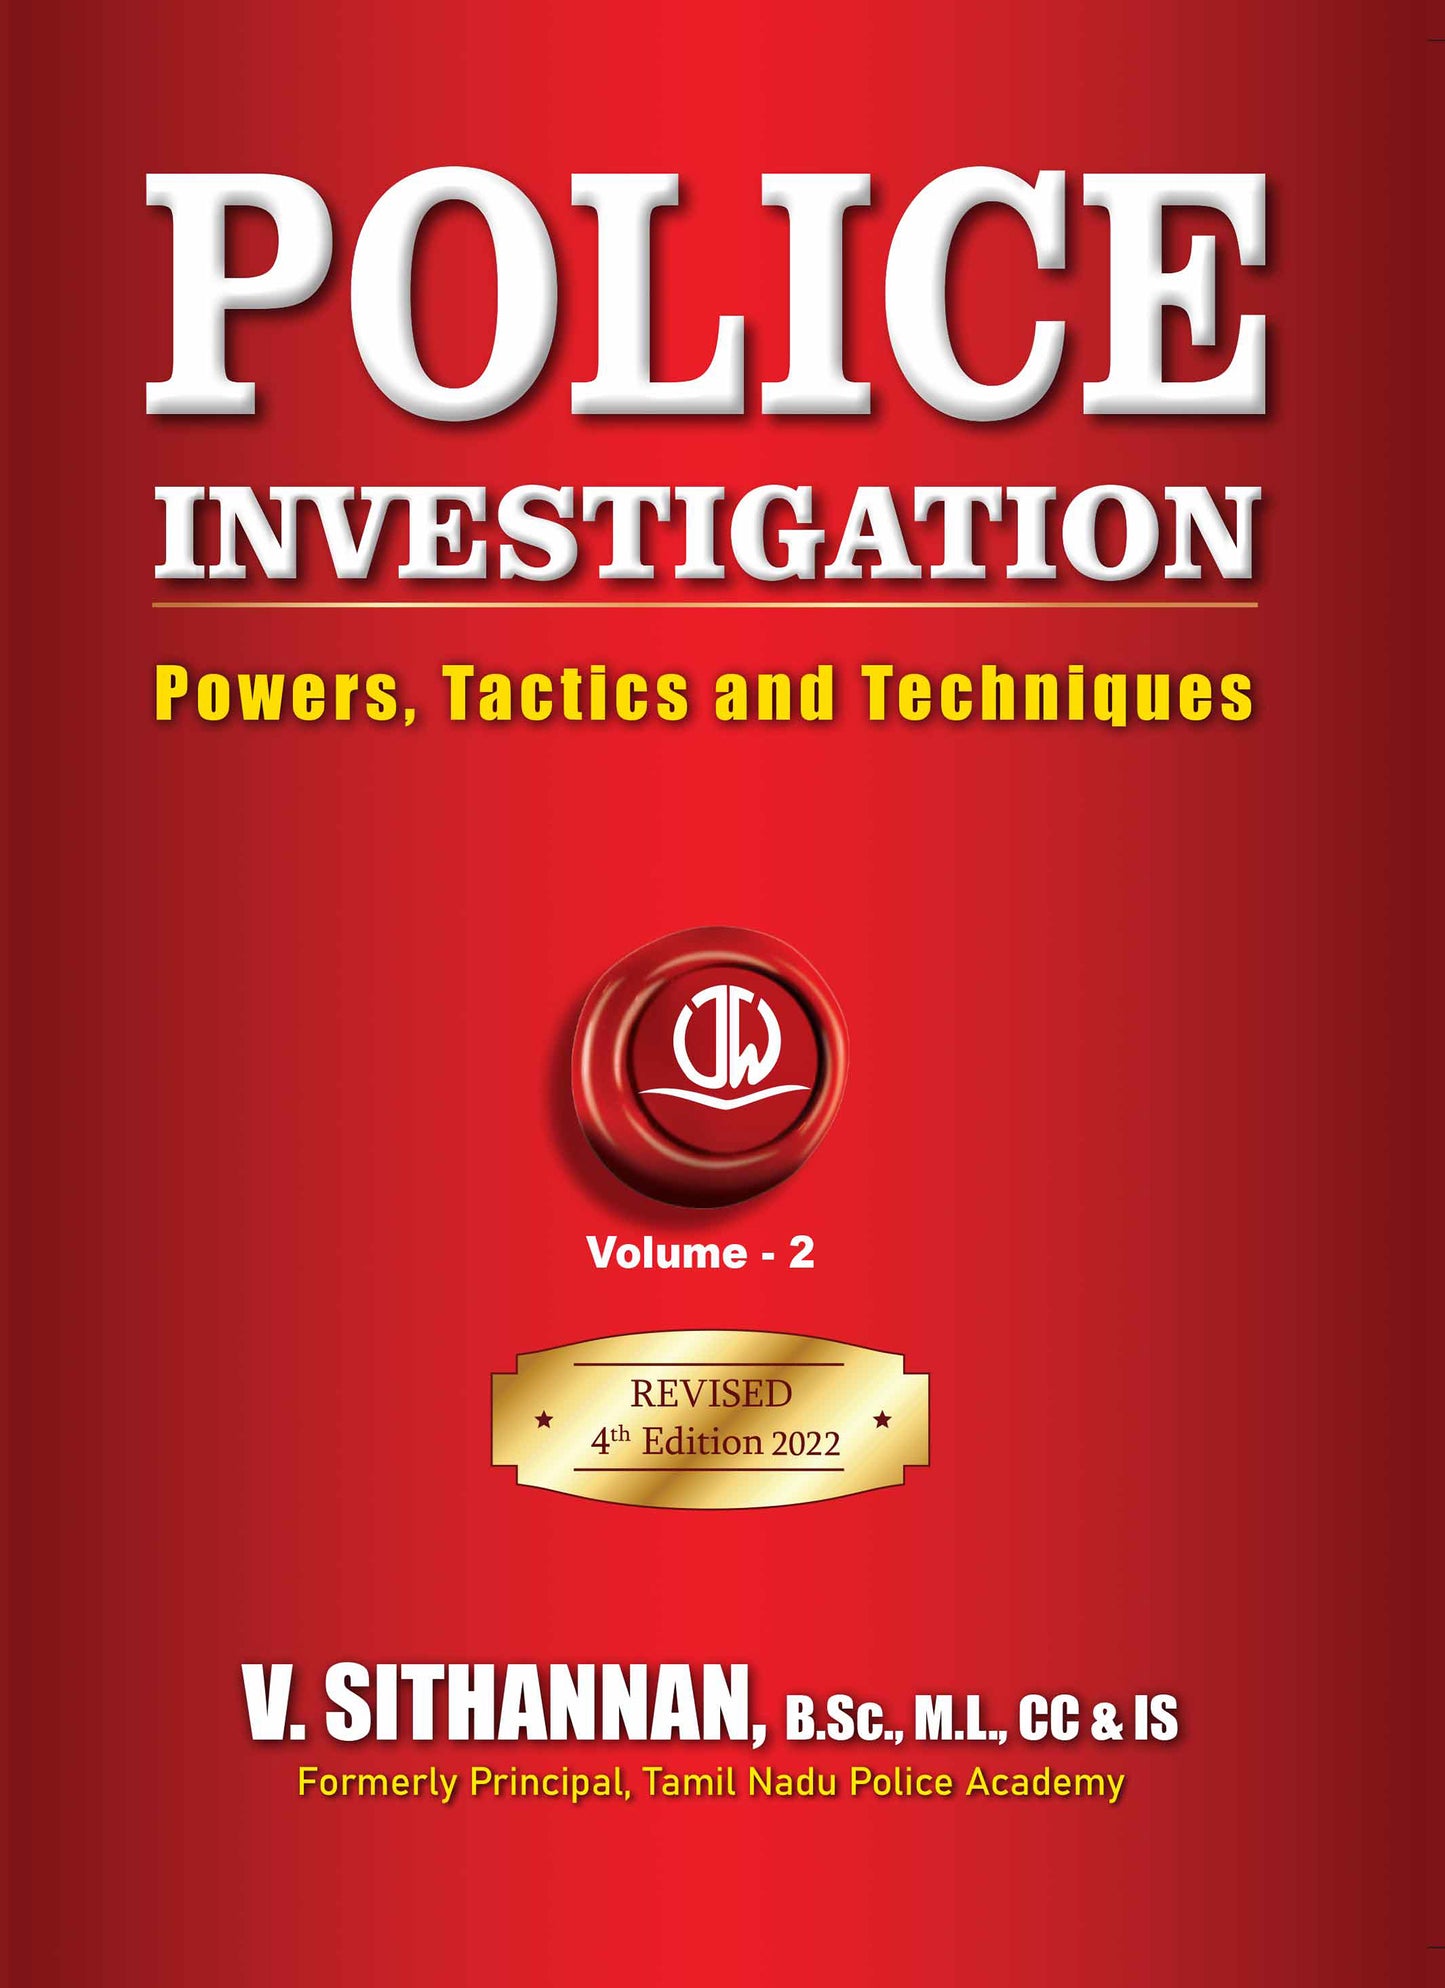 Police Investigation - Powers, Tactics and Techniques (Volume 1 & 2 combined together) - 4th updated Edition 2022